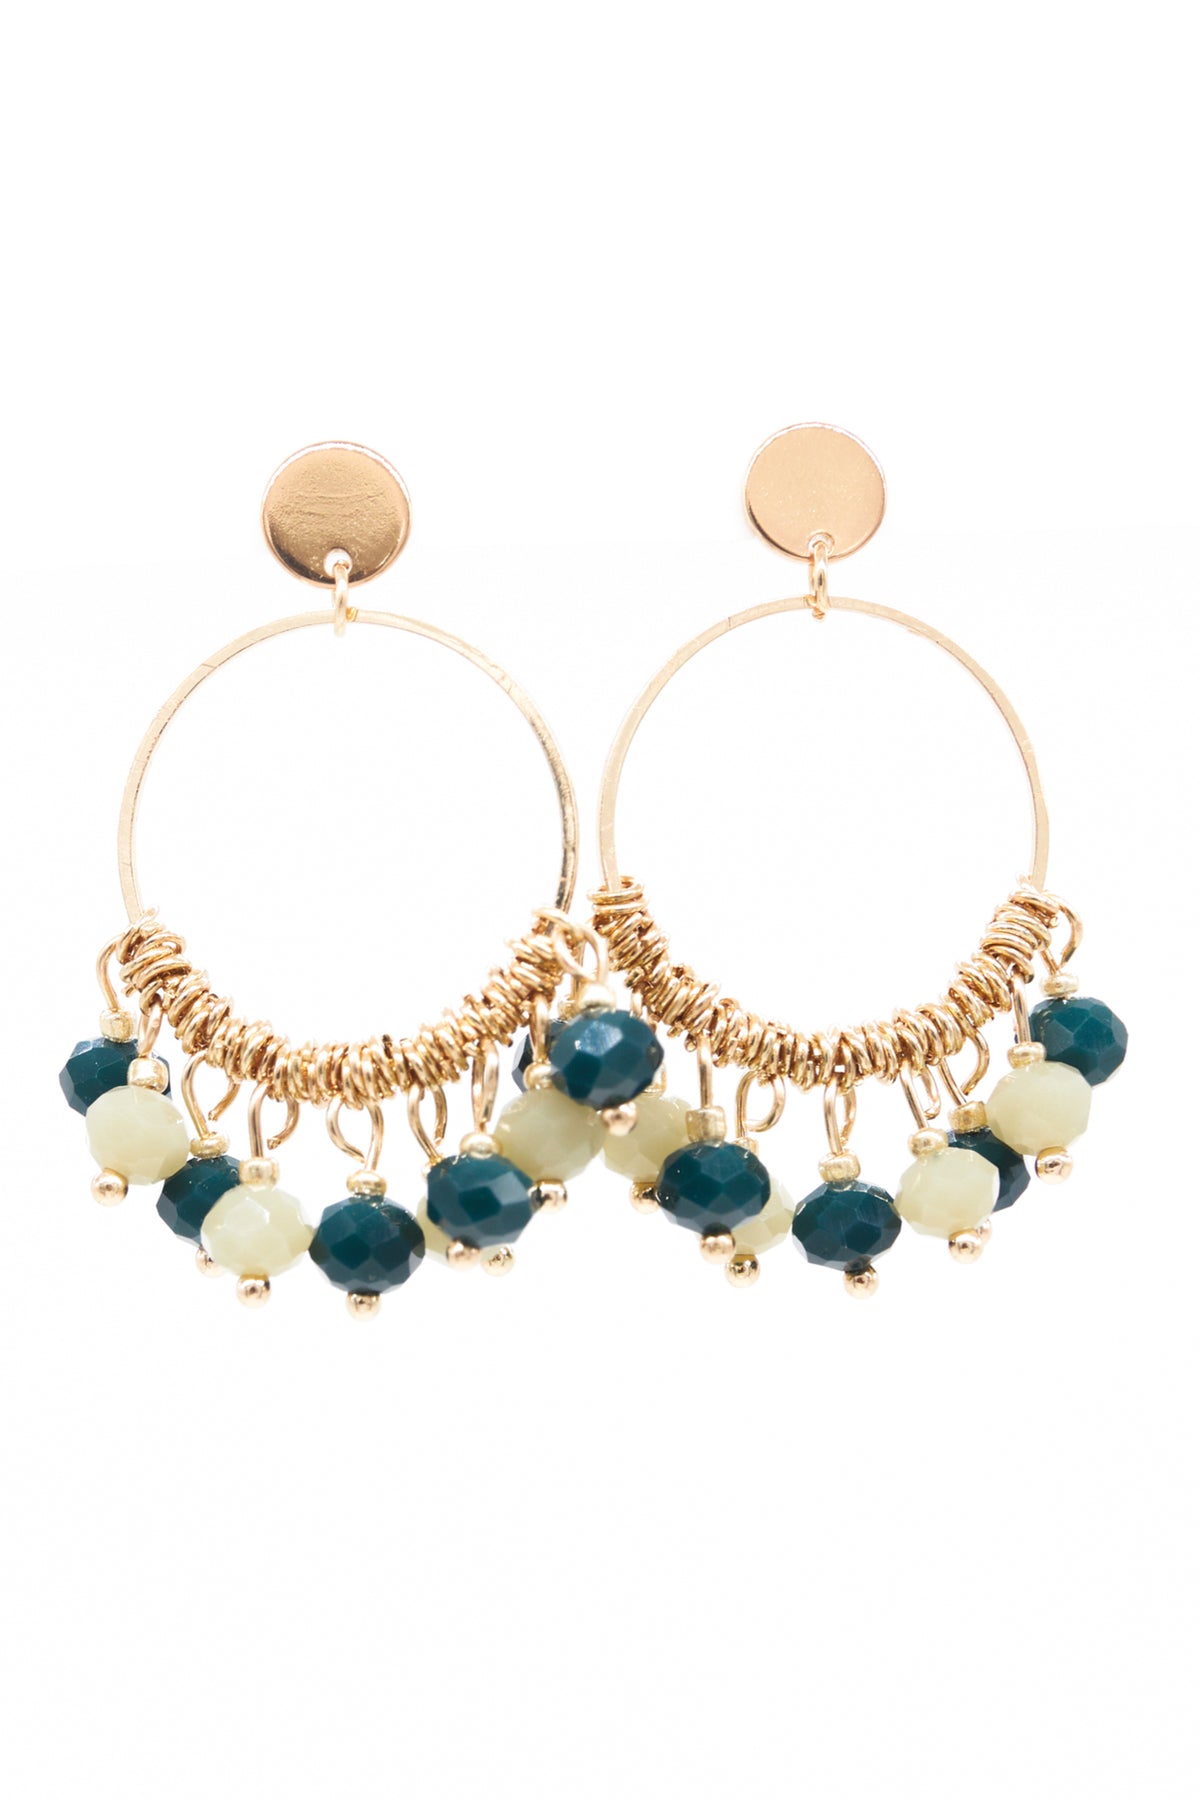 Gold Hoop Earrings With Emerald Beads